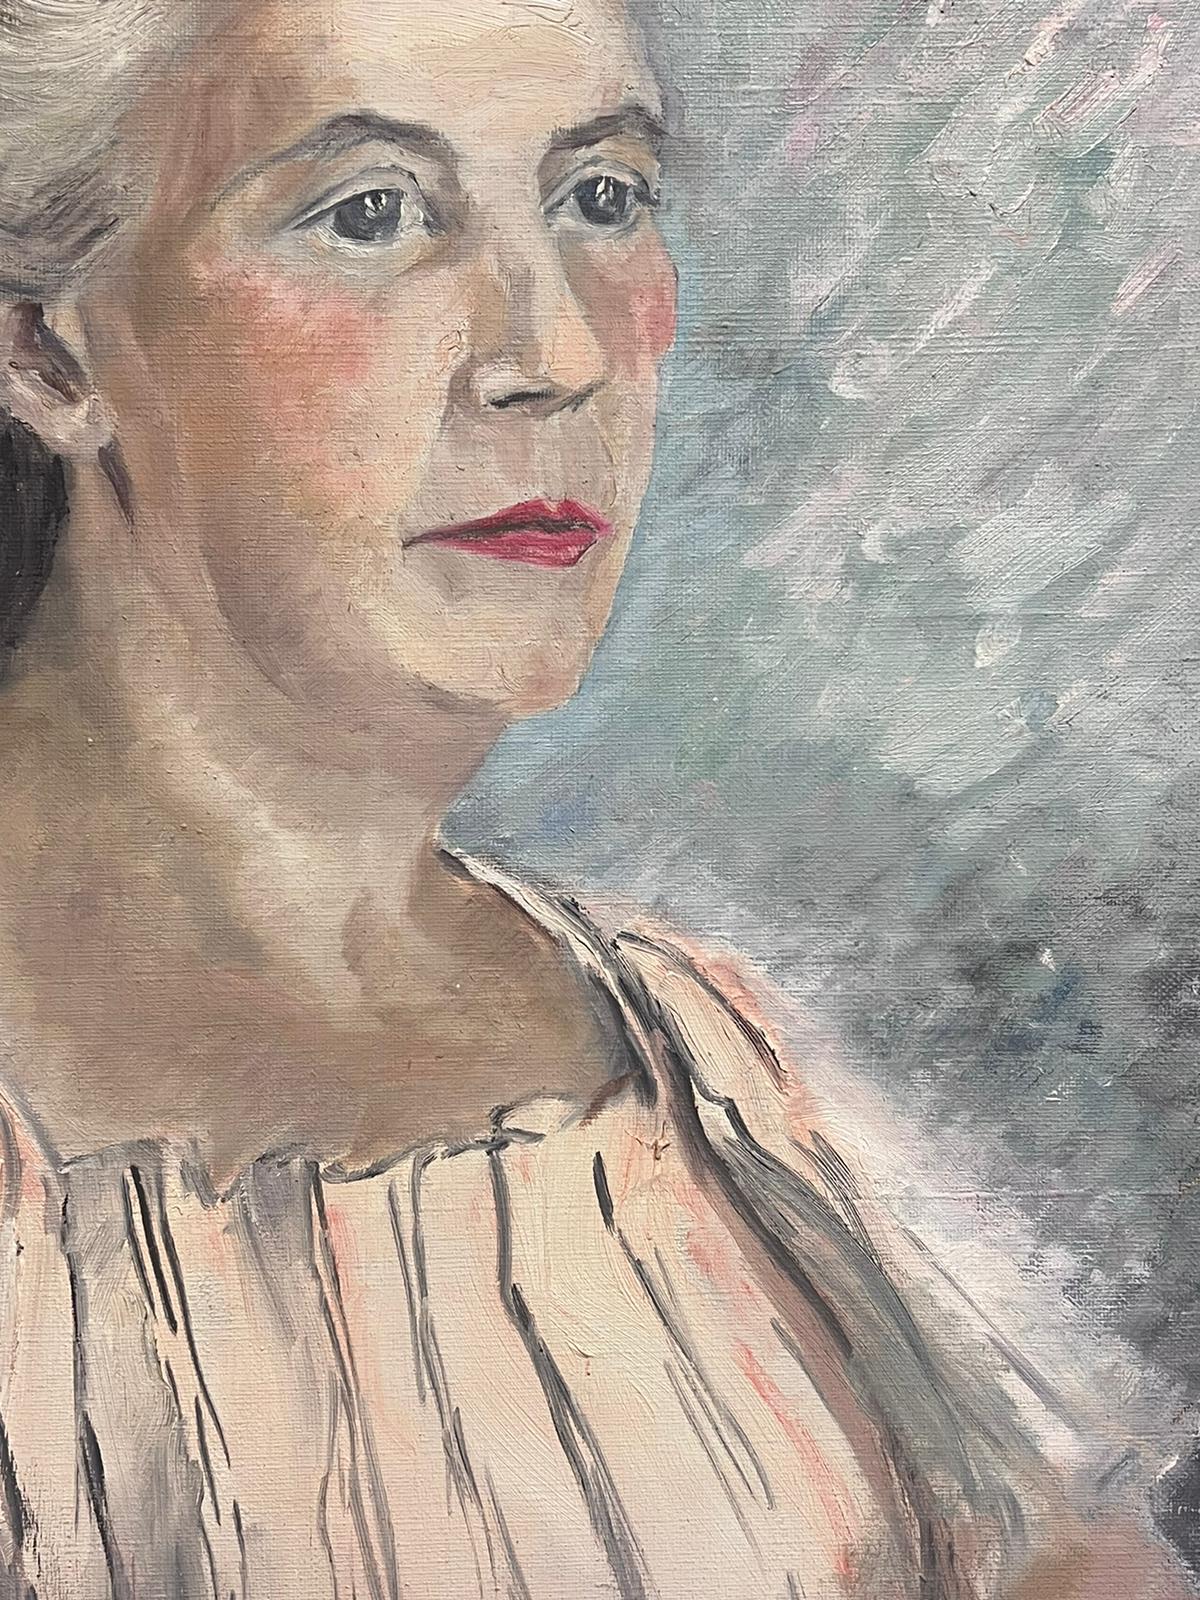 Portrait of a Lady
by Josine Vignon (French 1922-2022) 
dated 47'
signed oil painting on board, unframed
board: 18 x 14.5 inches
stamped verso
very good condition 
provenance: from the artists estate, France

Josine Vignon (1922-2022) was a French